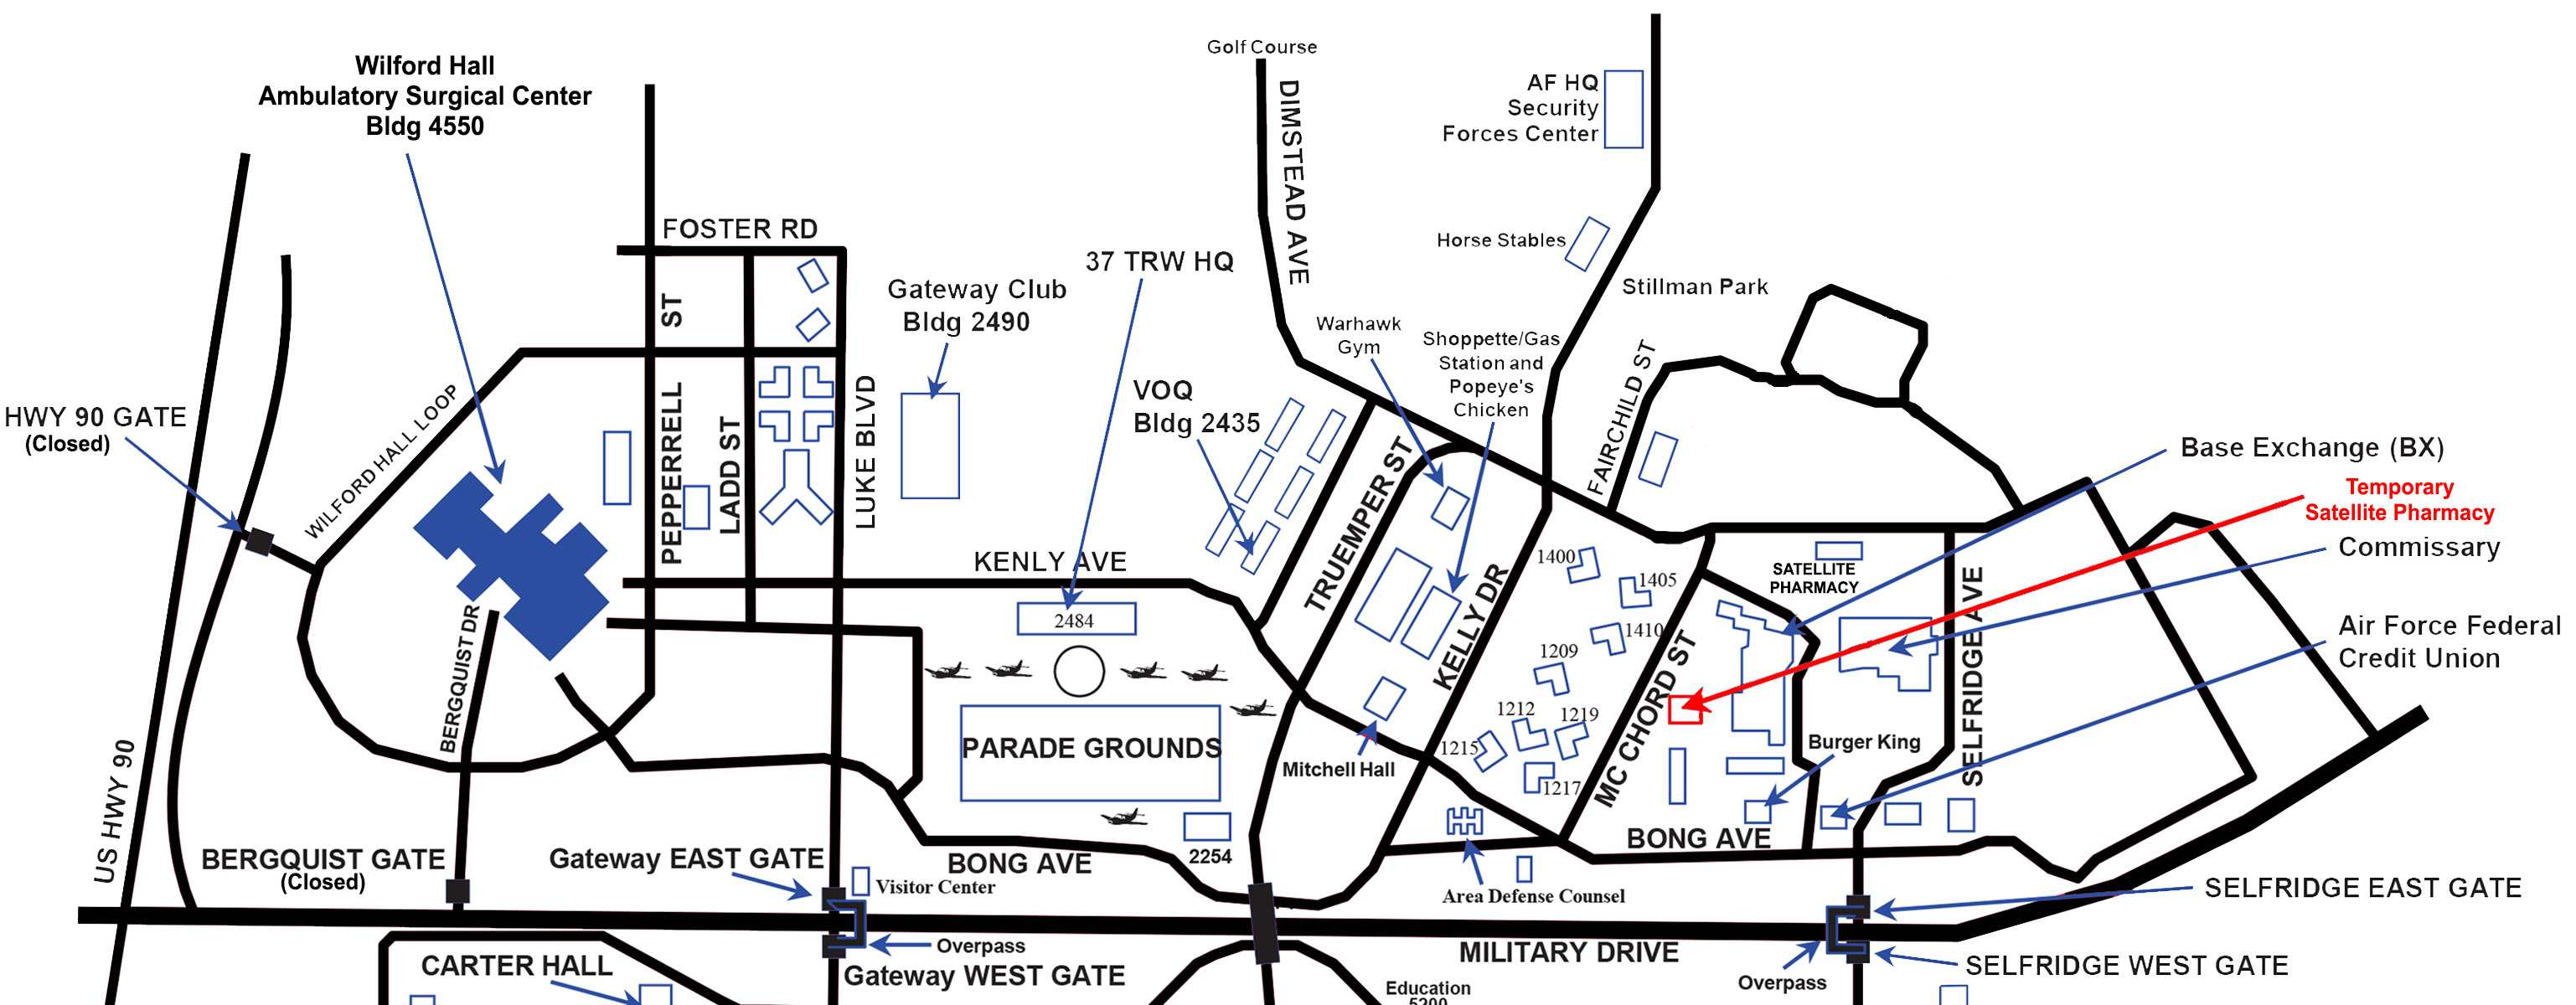 Satellite Pharmacy Temporarily Relocates; Renovation Project Gets - Lackland Texas Map